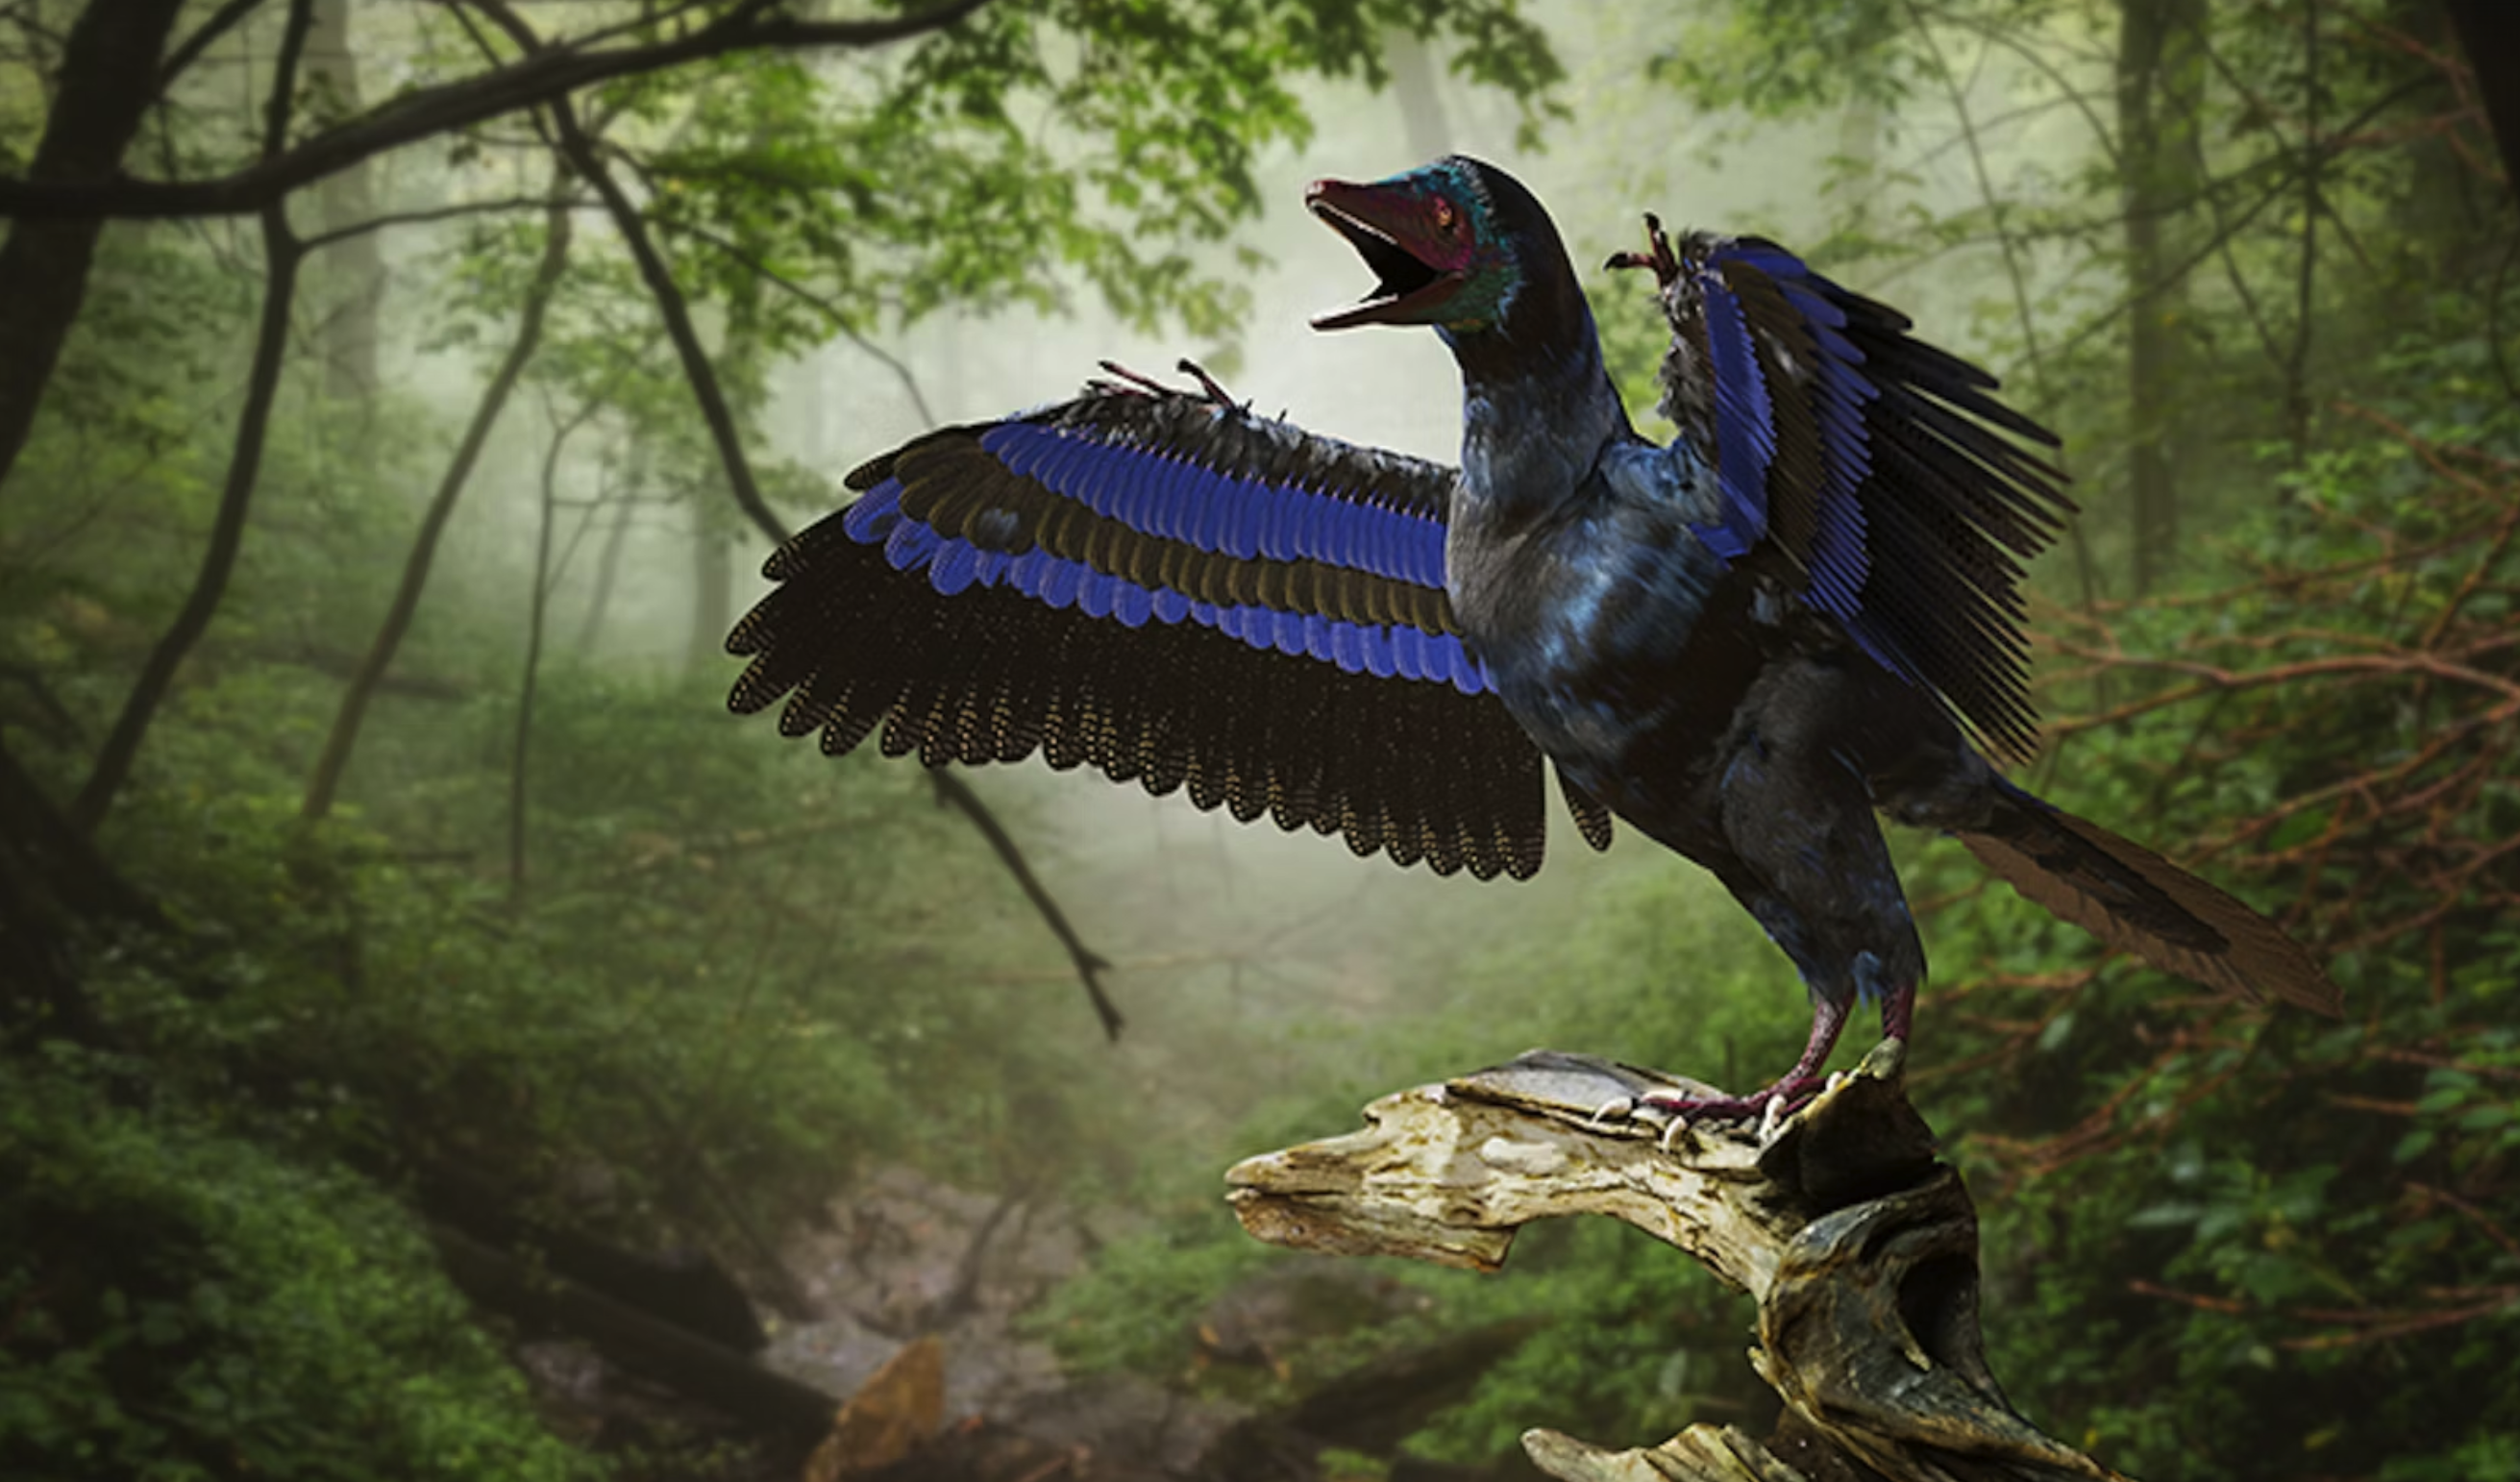 The archeopteryx, a small animal that lived around 150 million years ago, resembles a cross between an ancient Jurassic dinosaur and a modern-day bird